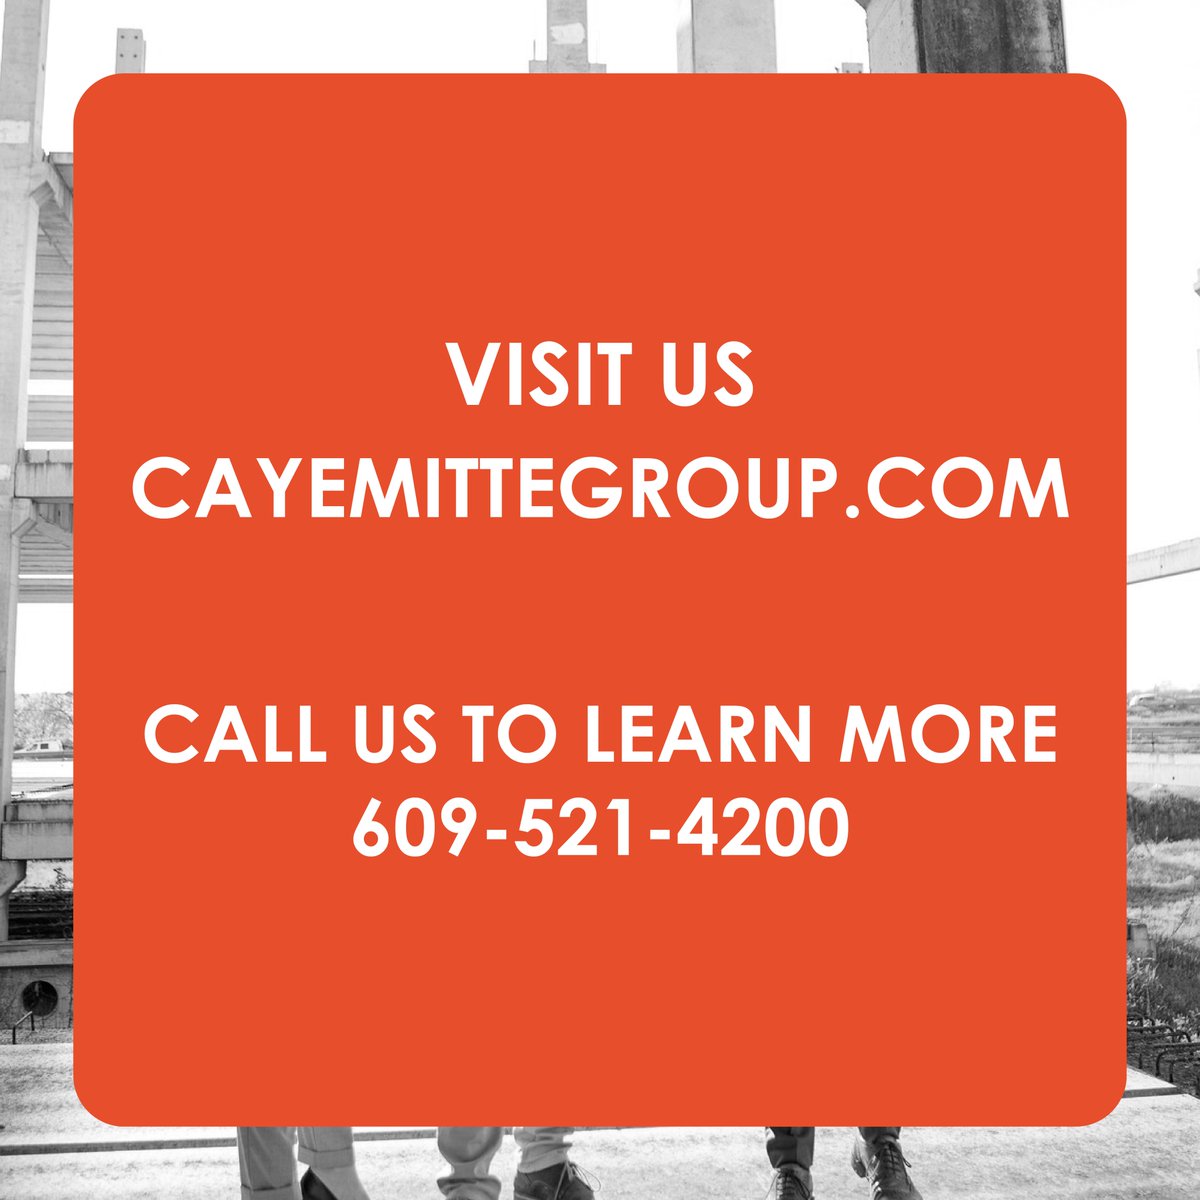 As a certified minority-owned, full-service insurance brokerage and surety bonding firm, The Cayemitte Group is proud to partner with each of its clients to assist in managing corporate risks and position firms for opportunity and growth #MBE #Diversity #Diversesupplier #NYSMWBE